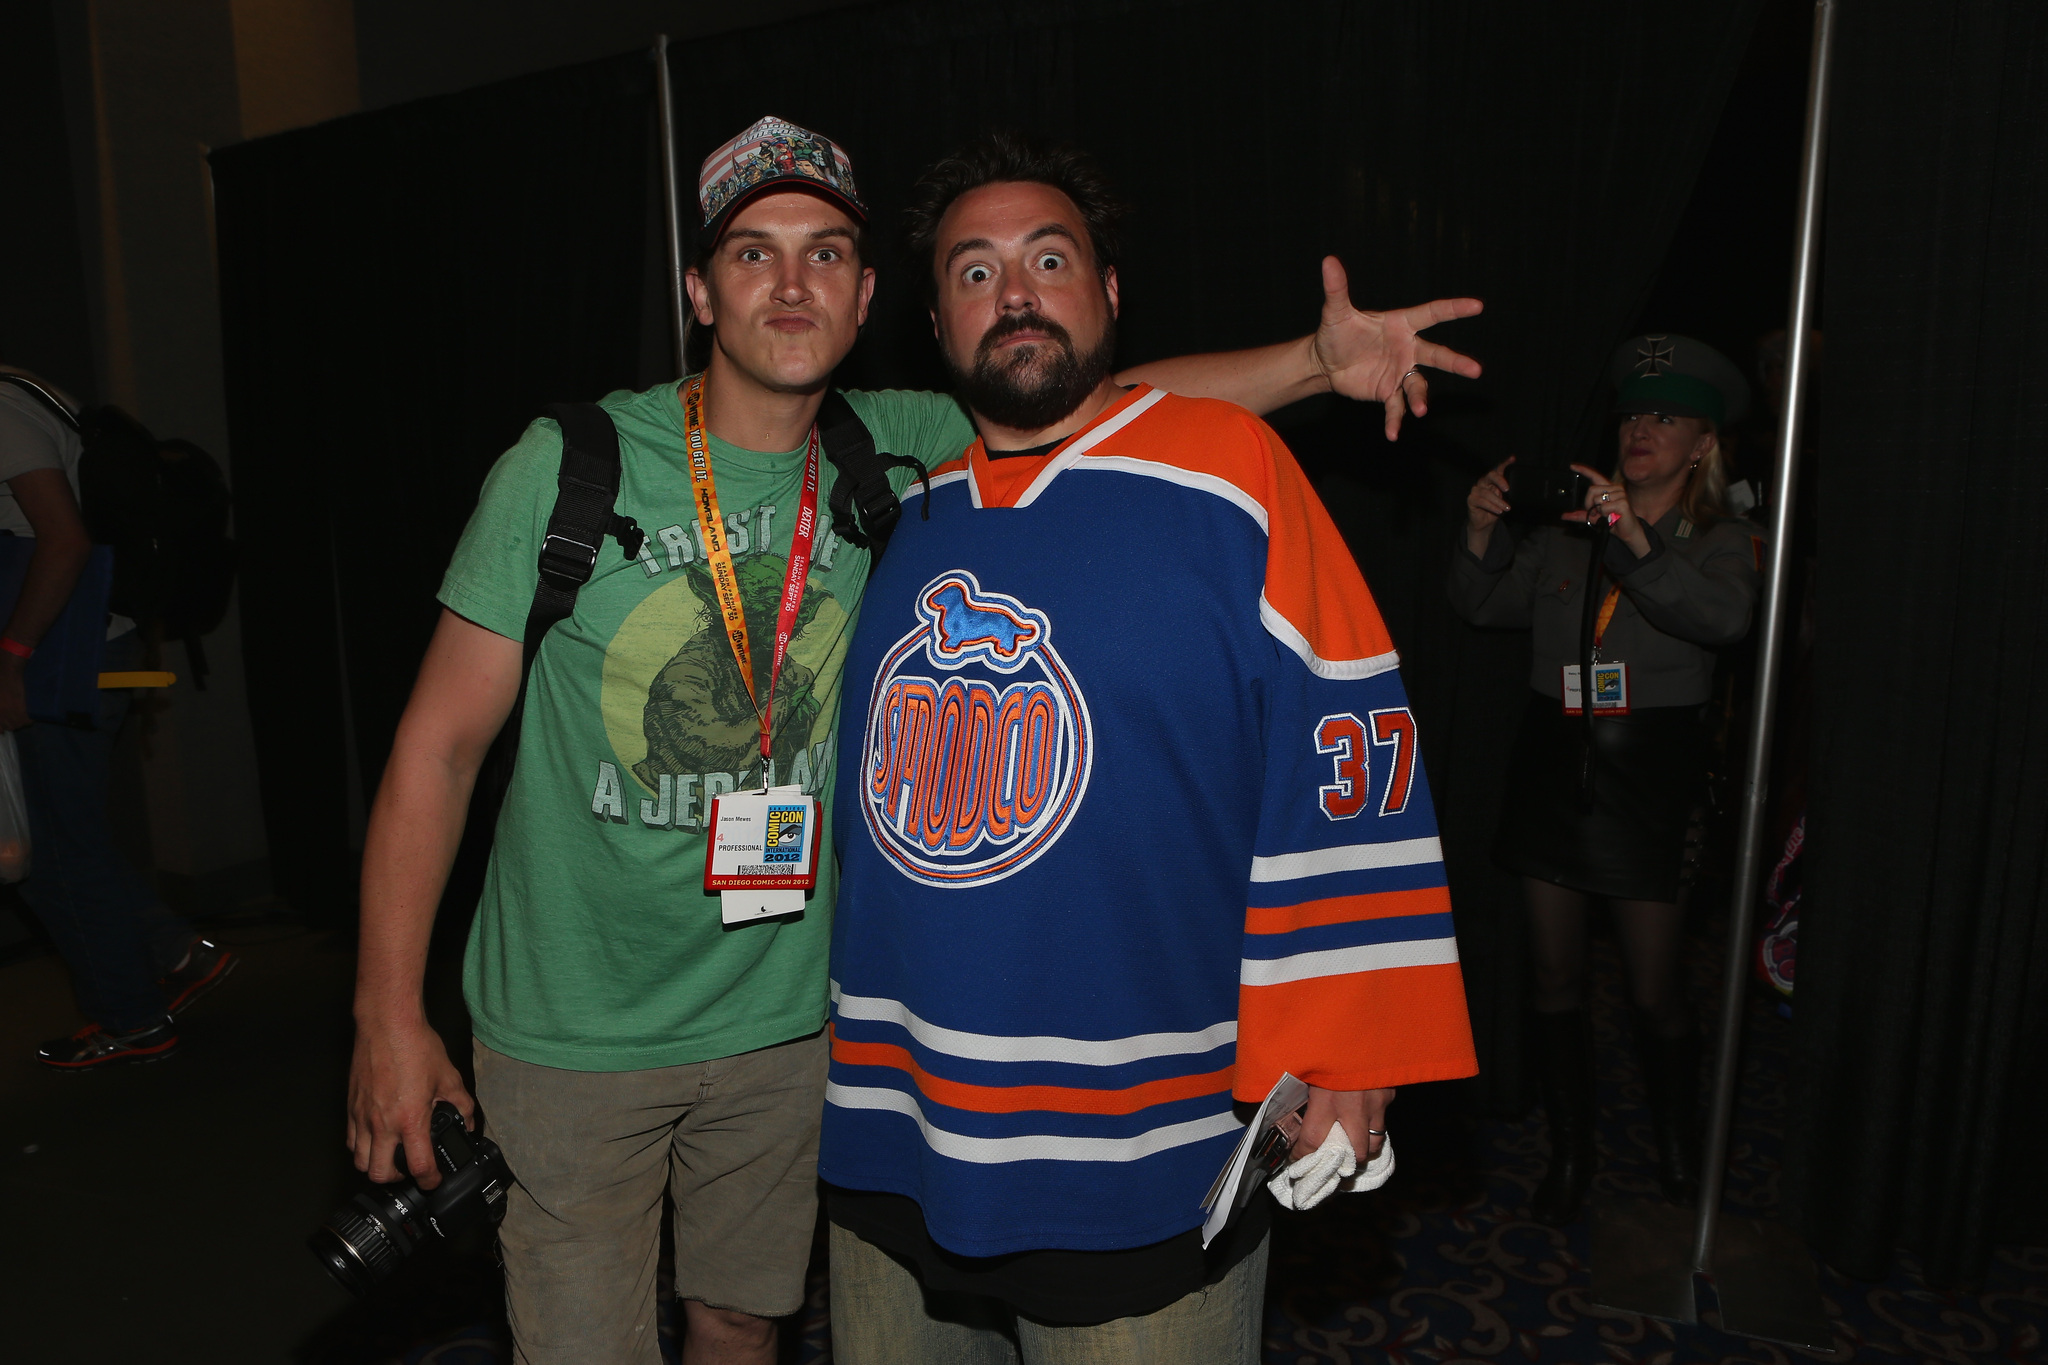 Kevin Smith and Jason Mewes